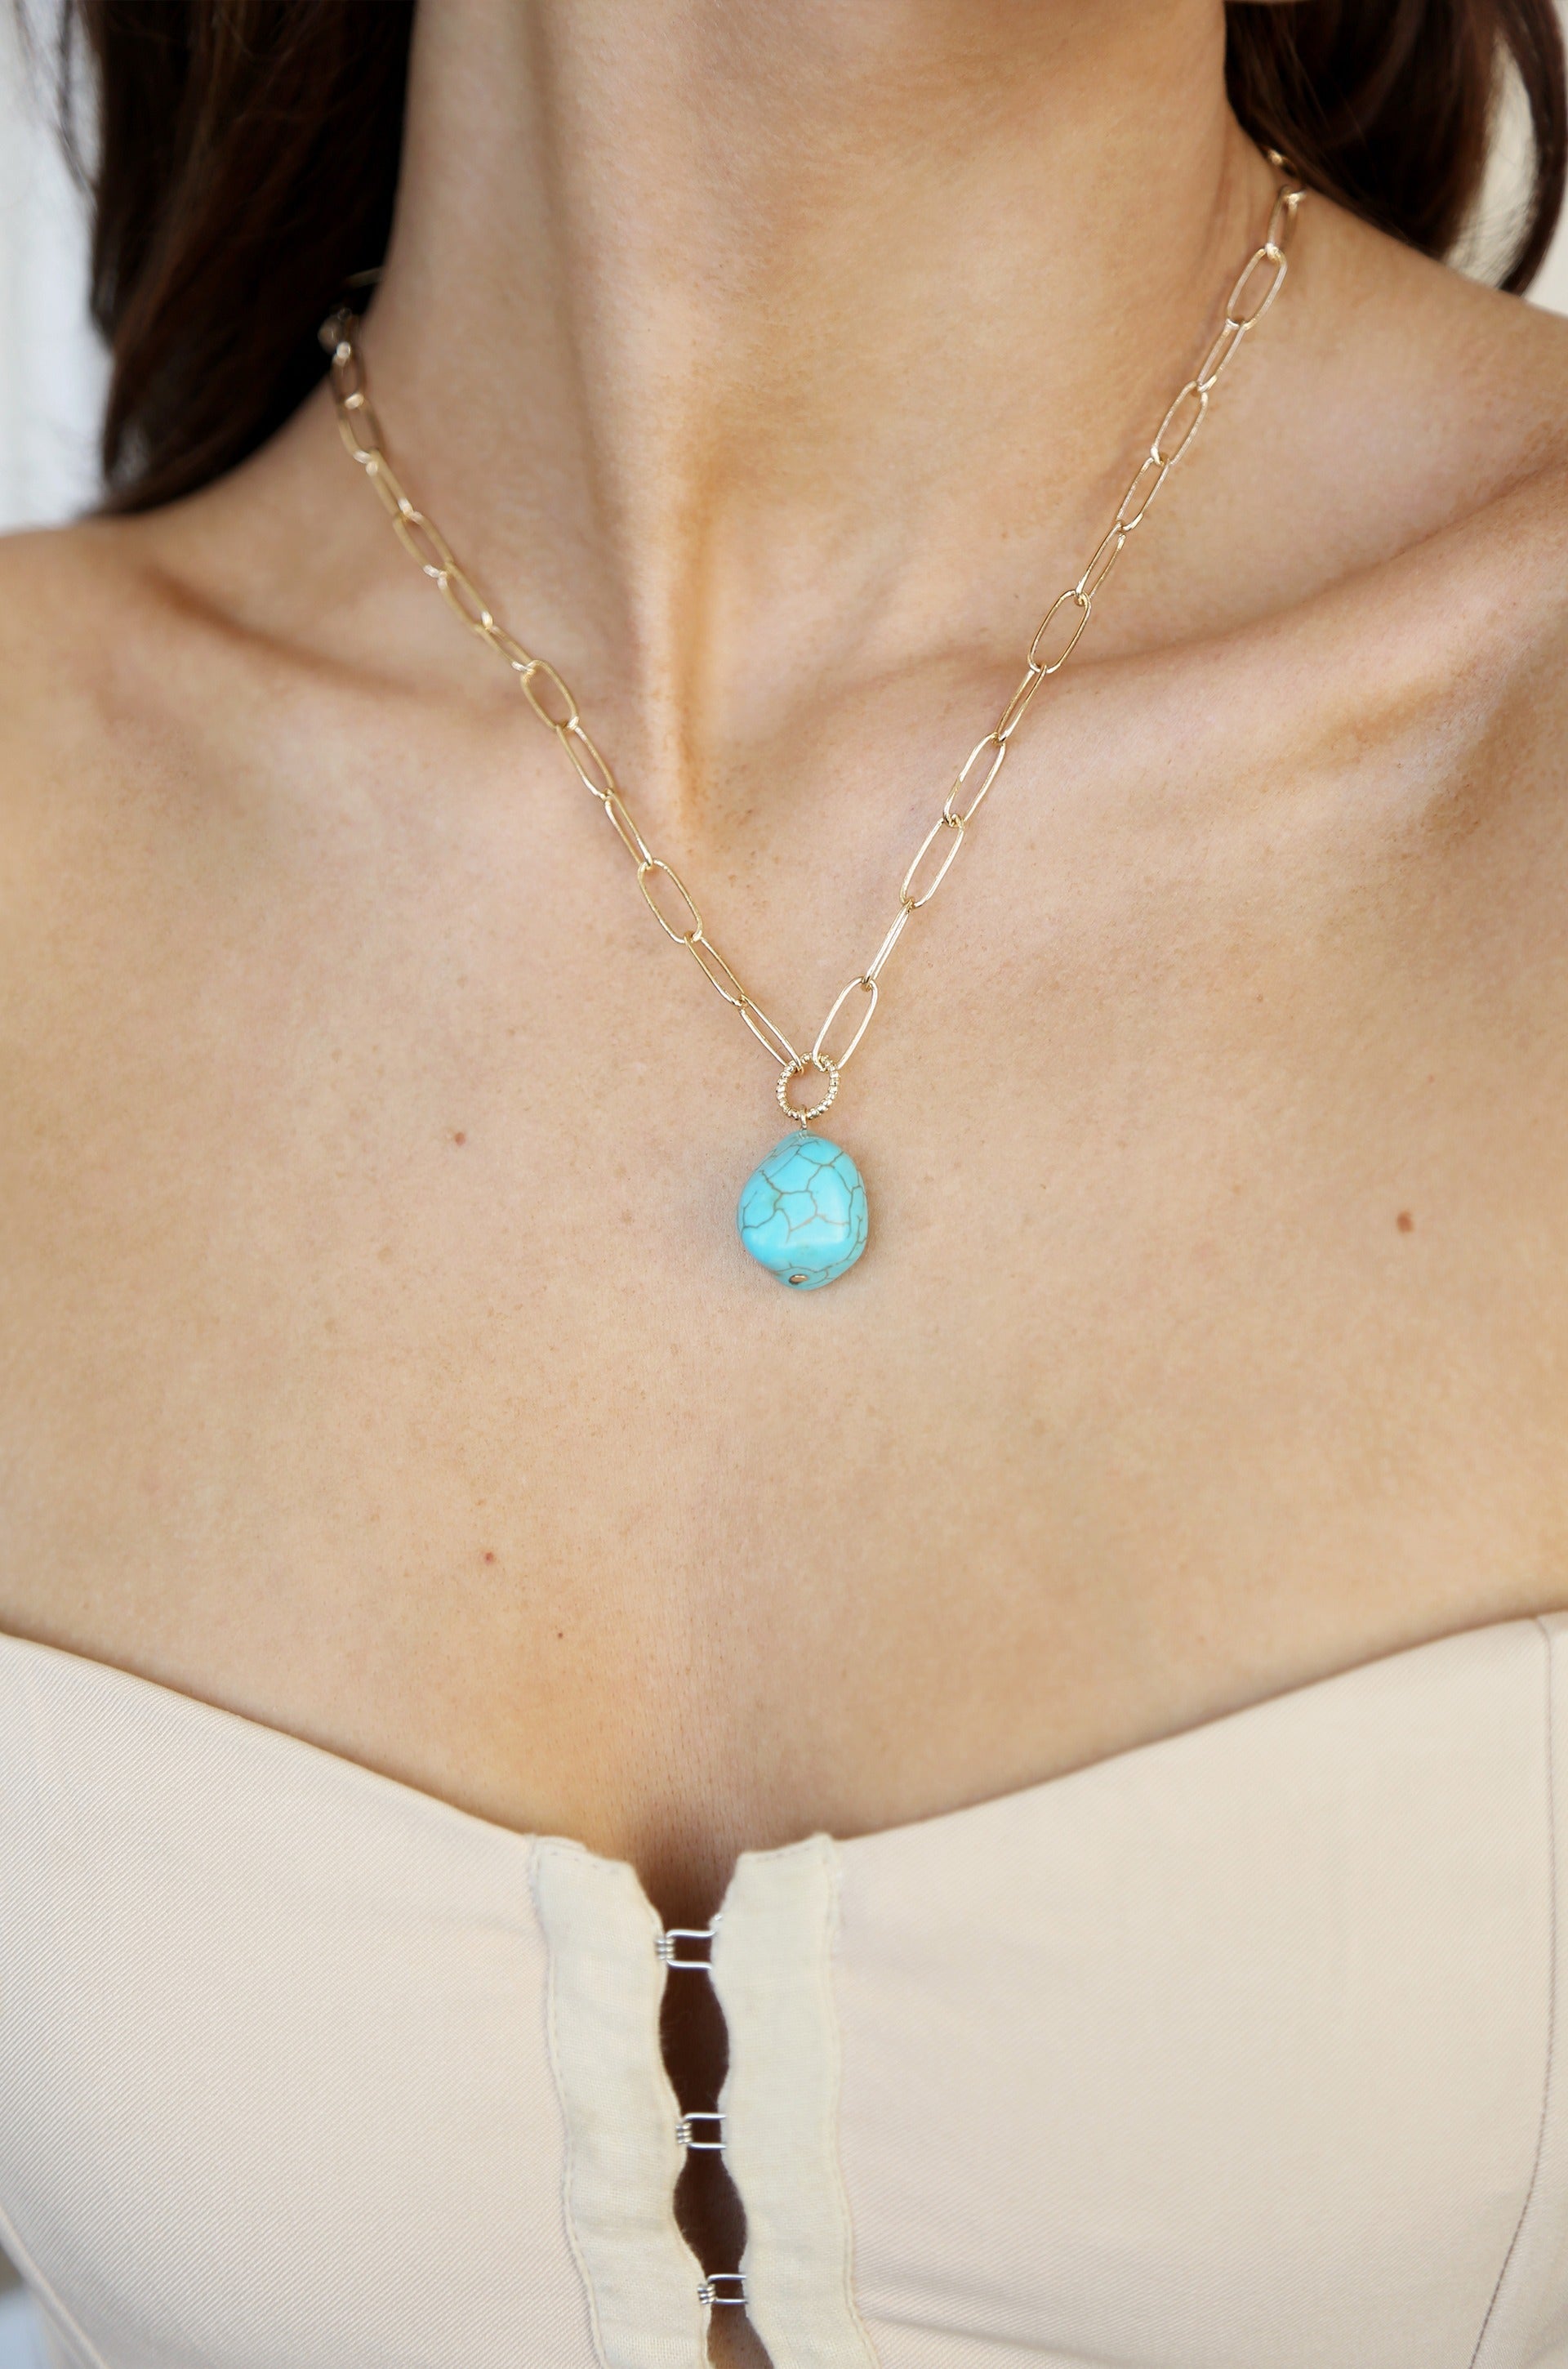 Single Pearl Open Links Chain Necklace in turquoise on model